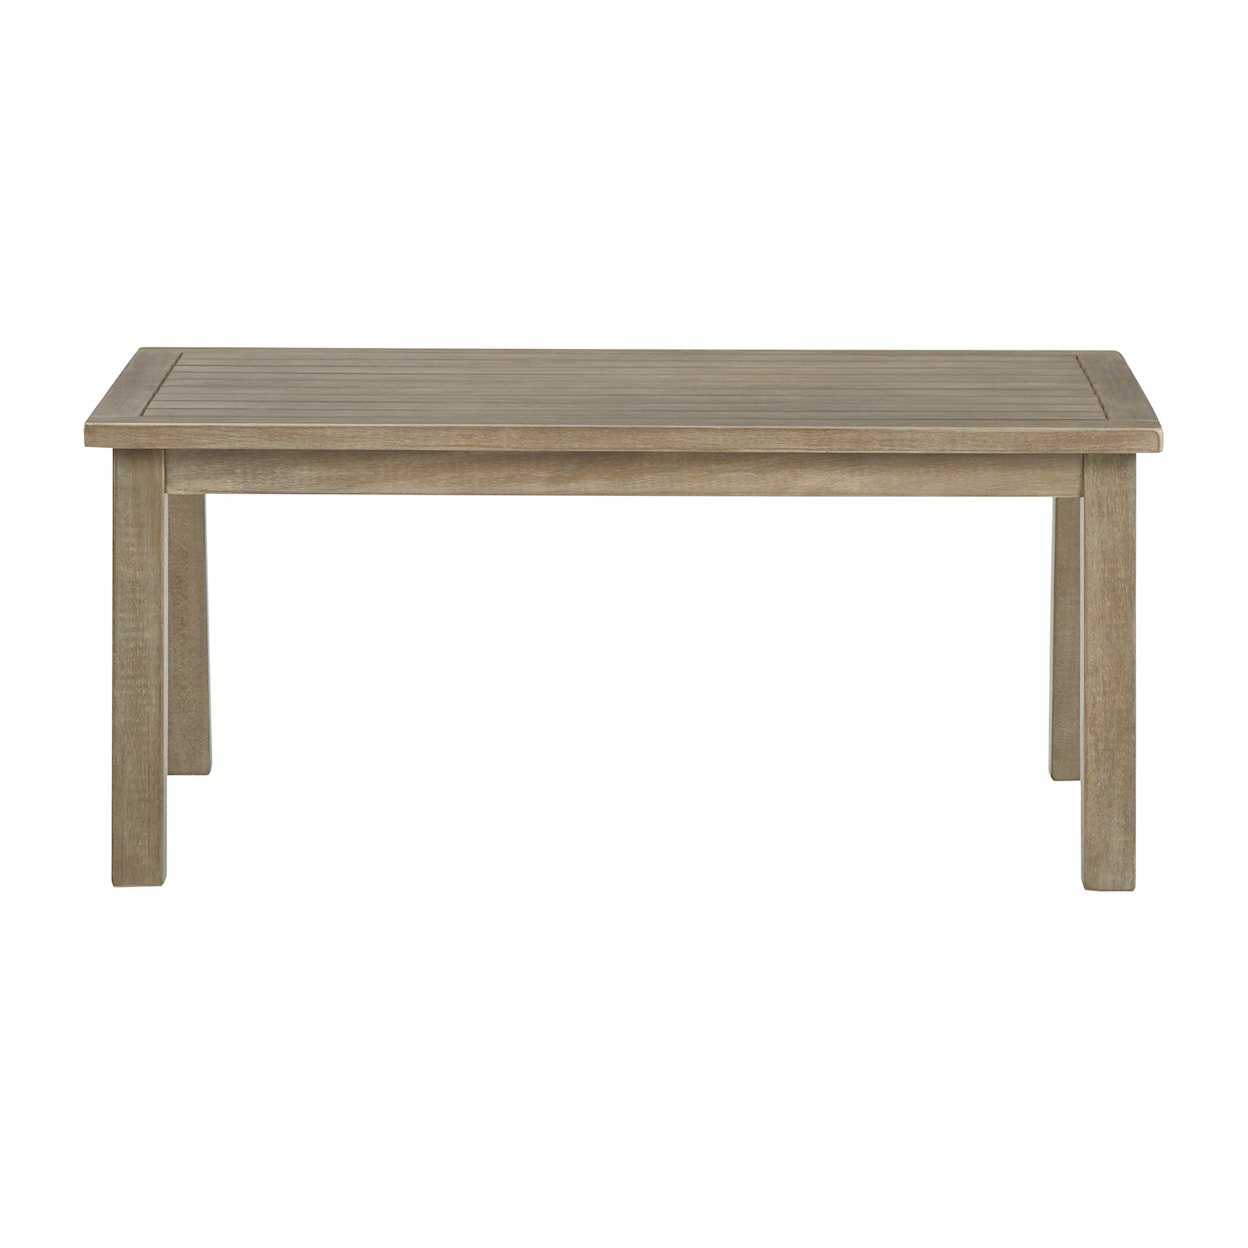 Signature Design by Ashley Barn Cove Outdoor Coffee Table